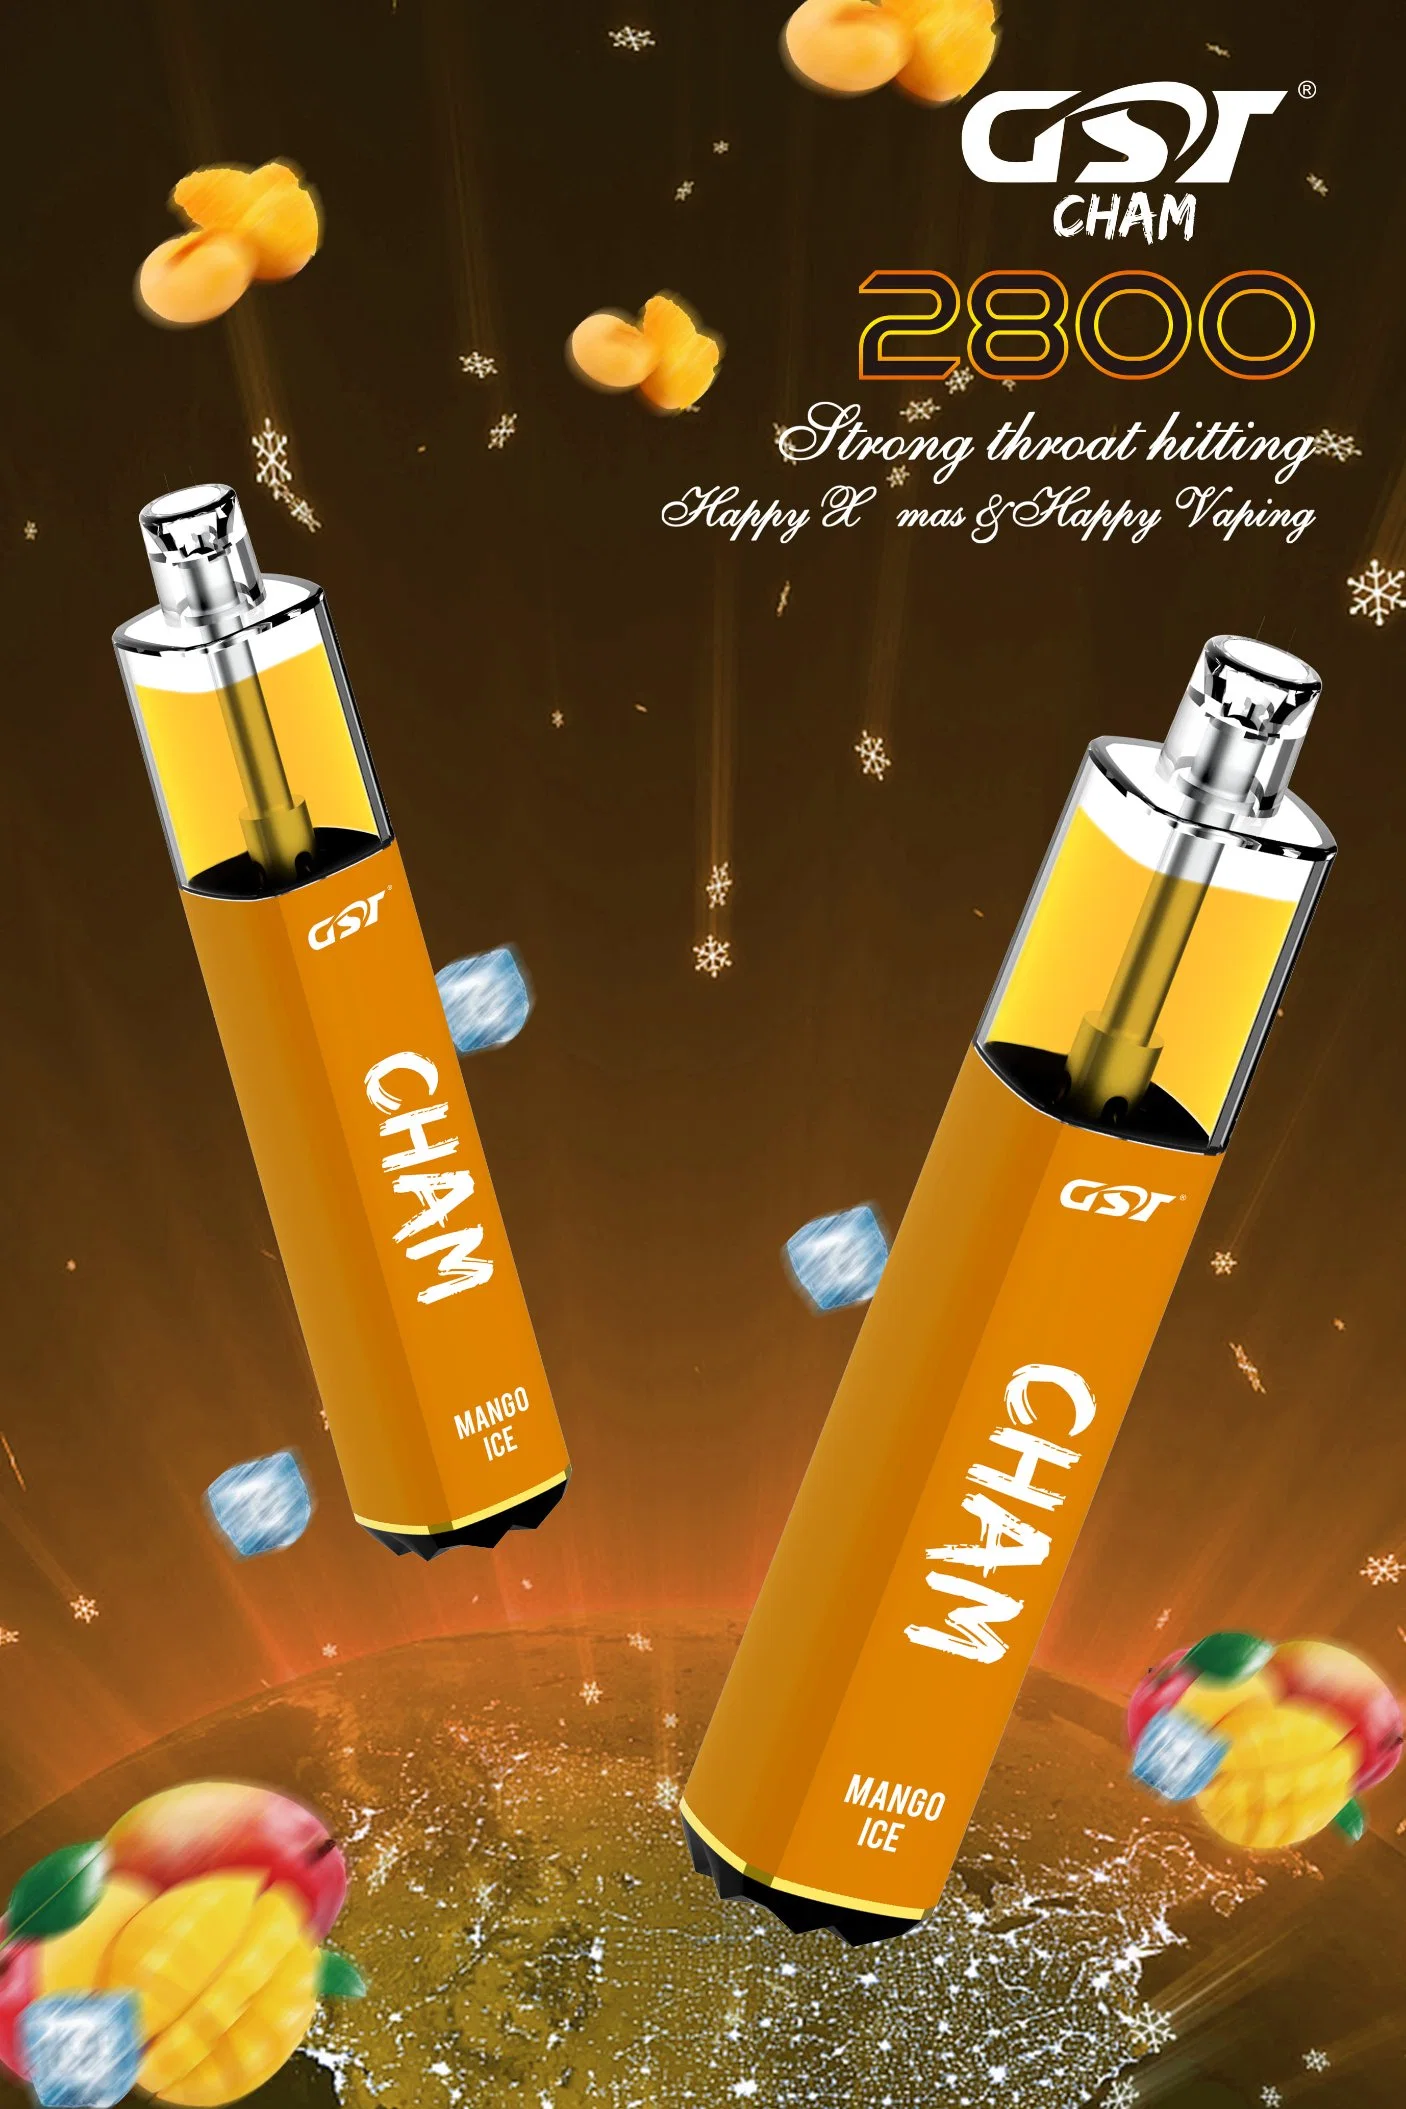 2800 Puffs Gst Cham Hot Vape High quality/High cost performance 10 Flavors Available Puff XXL